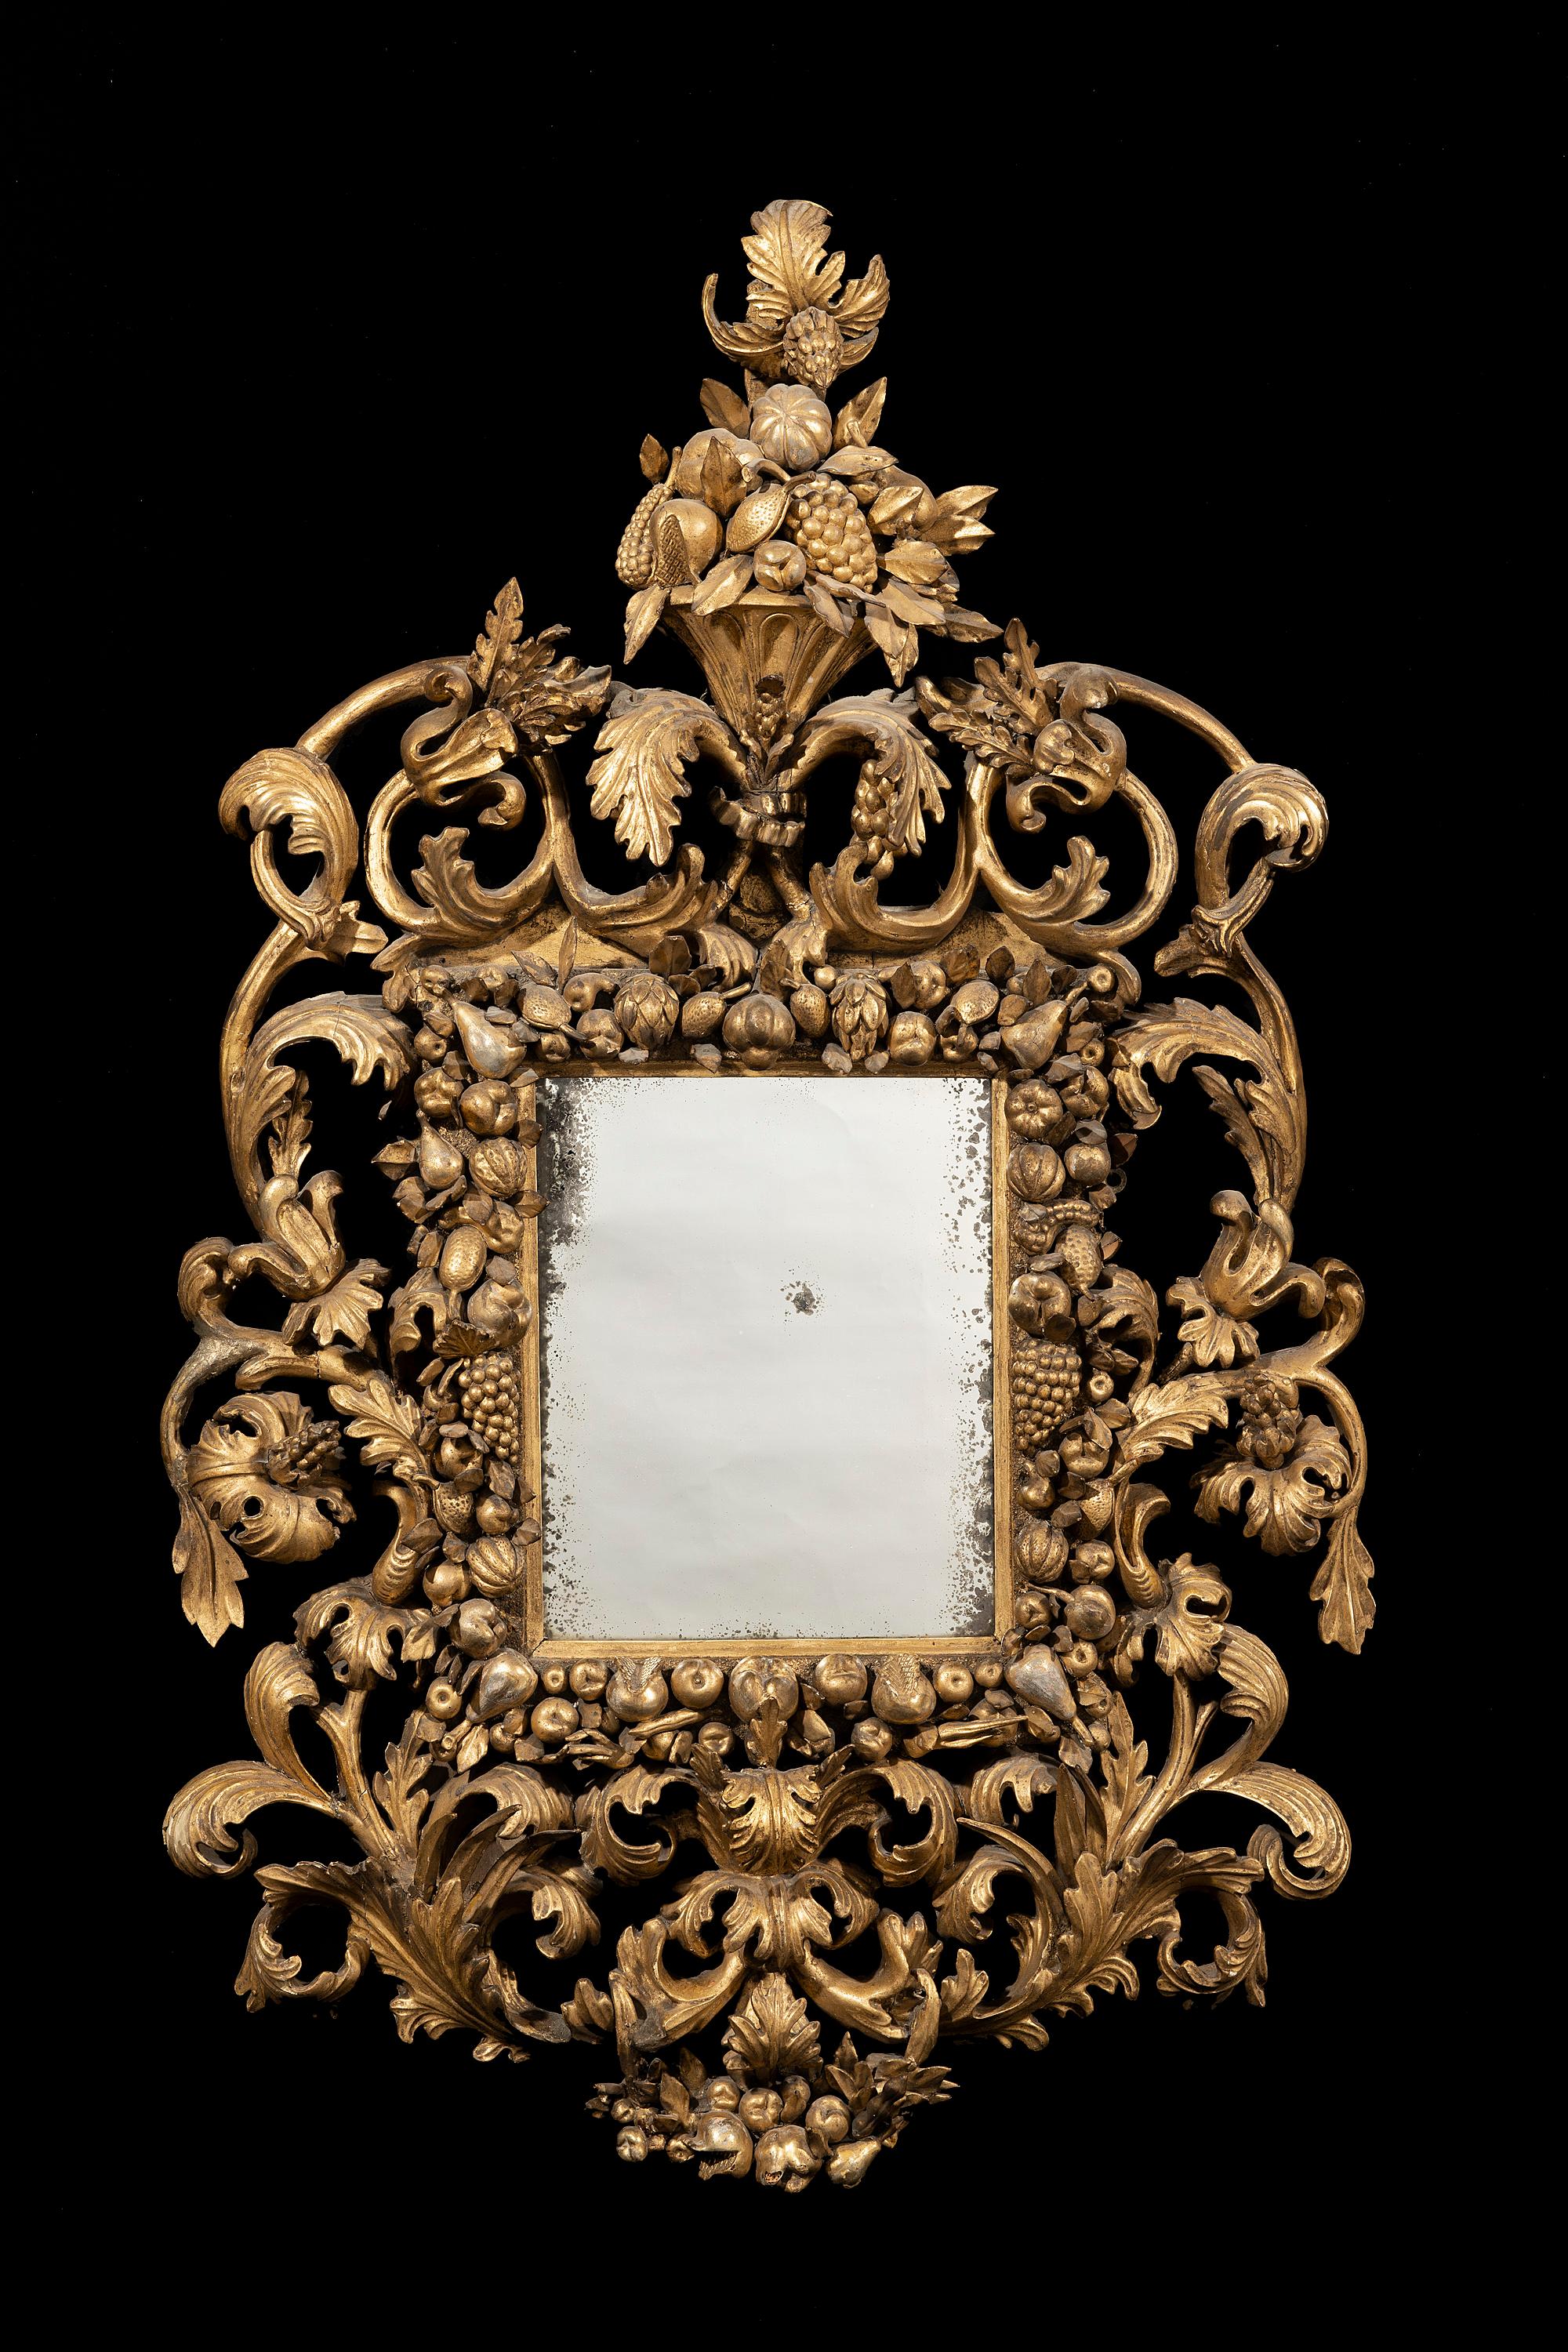 The flowers and fruit urn to the top of the mirror sit above acanthus leaf decoration surmounted on a robust rococo outer frame with scrolling acanthus leaves and large flower heads. The apron is profusely carved with scrolled acanthus leaves that